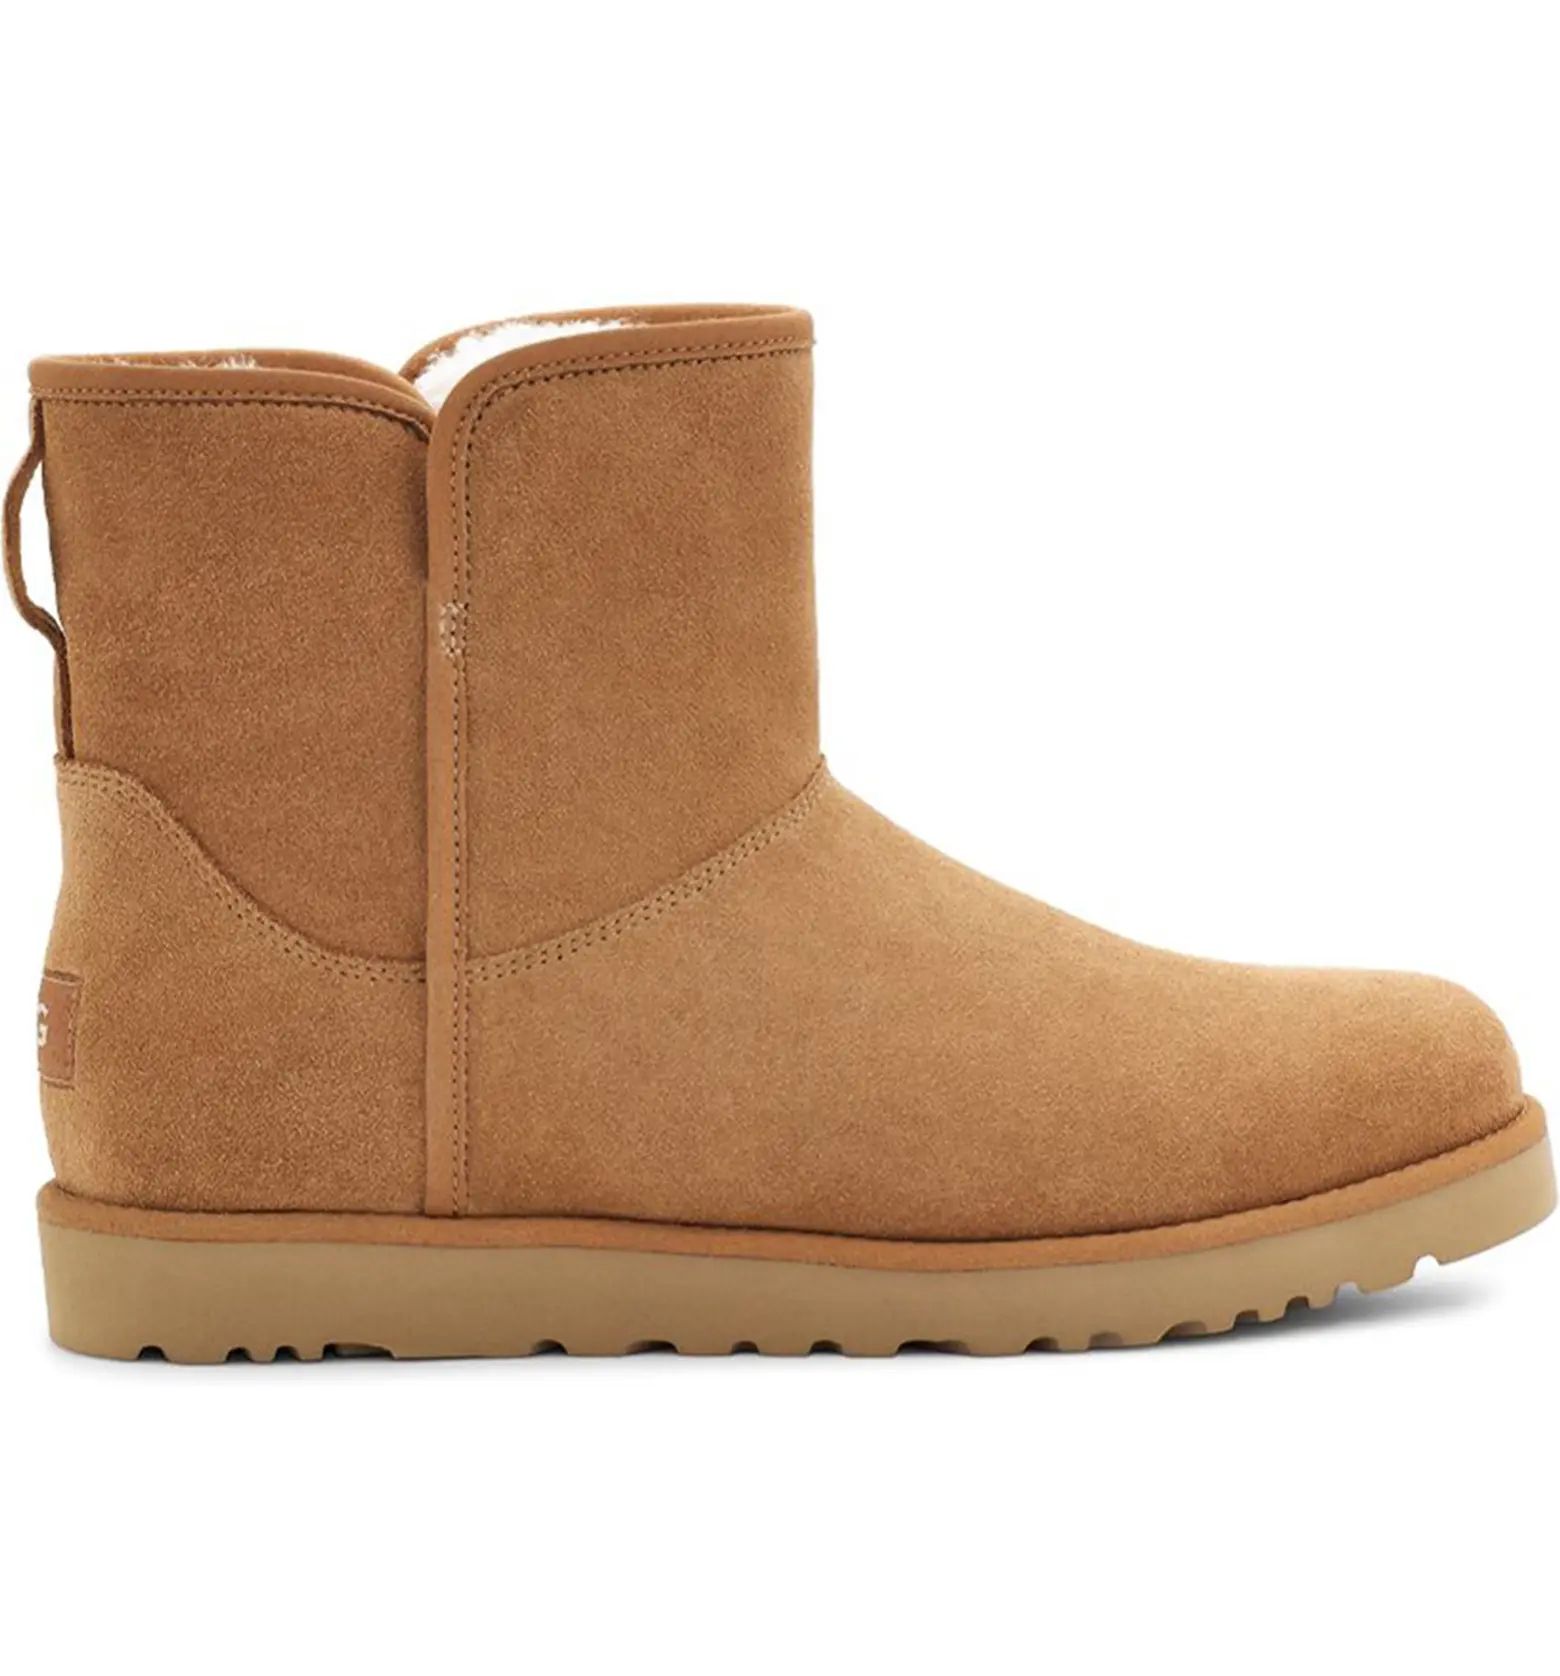 Cory II Genuine Shearling Lined Boot | Nordstrom Rack